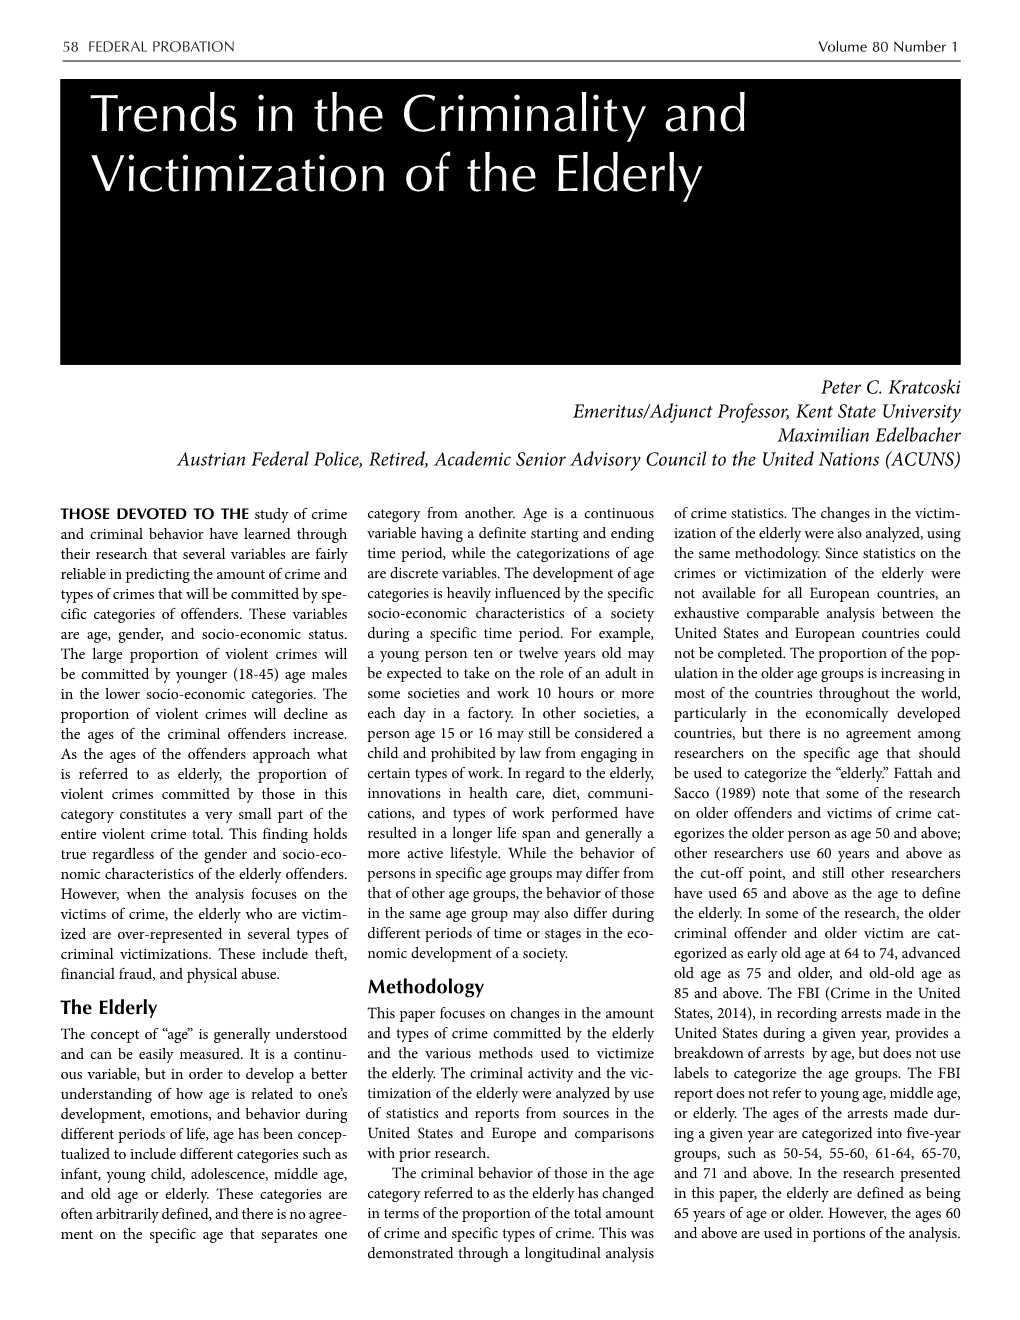 Article Title Trends in the Criminality and Victimization of the Elderly